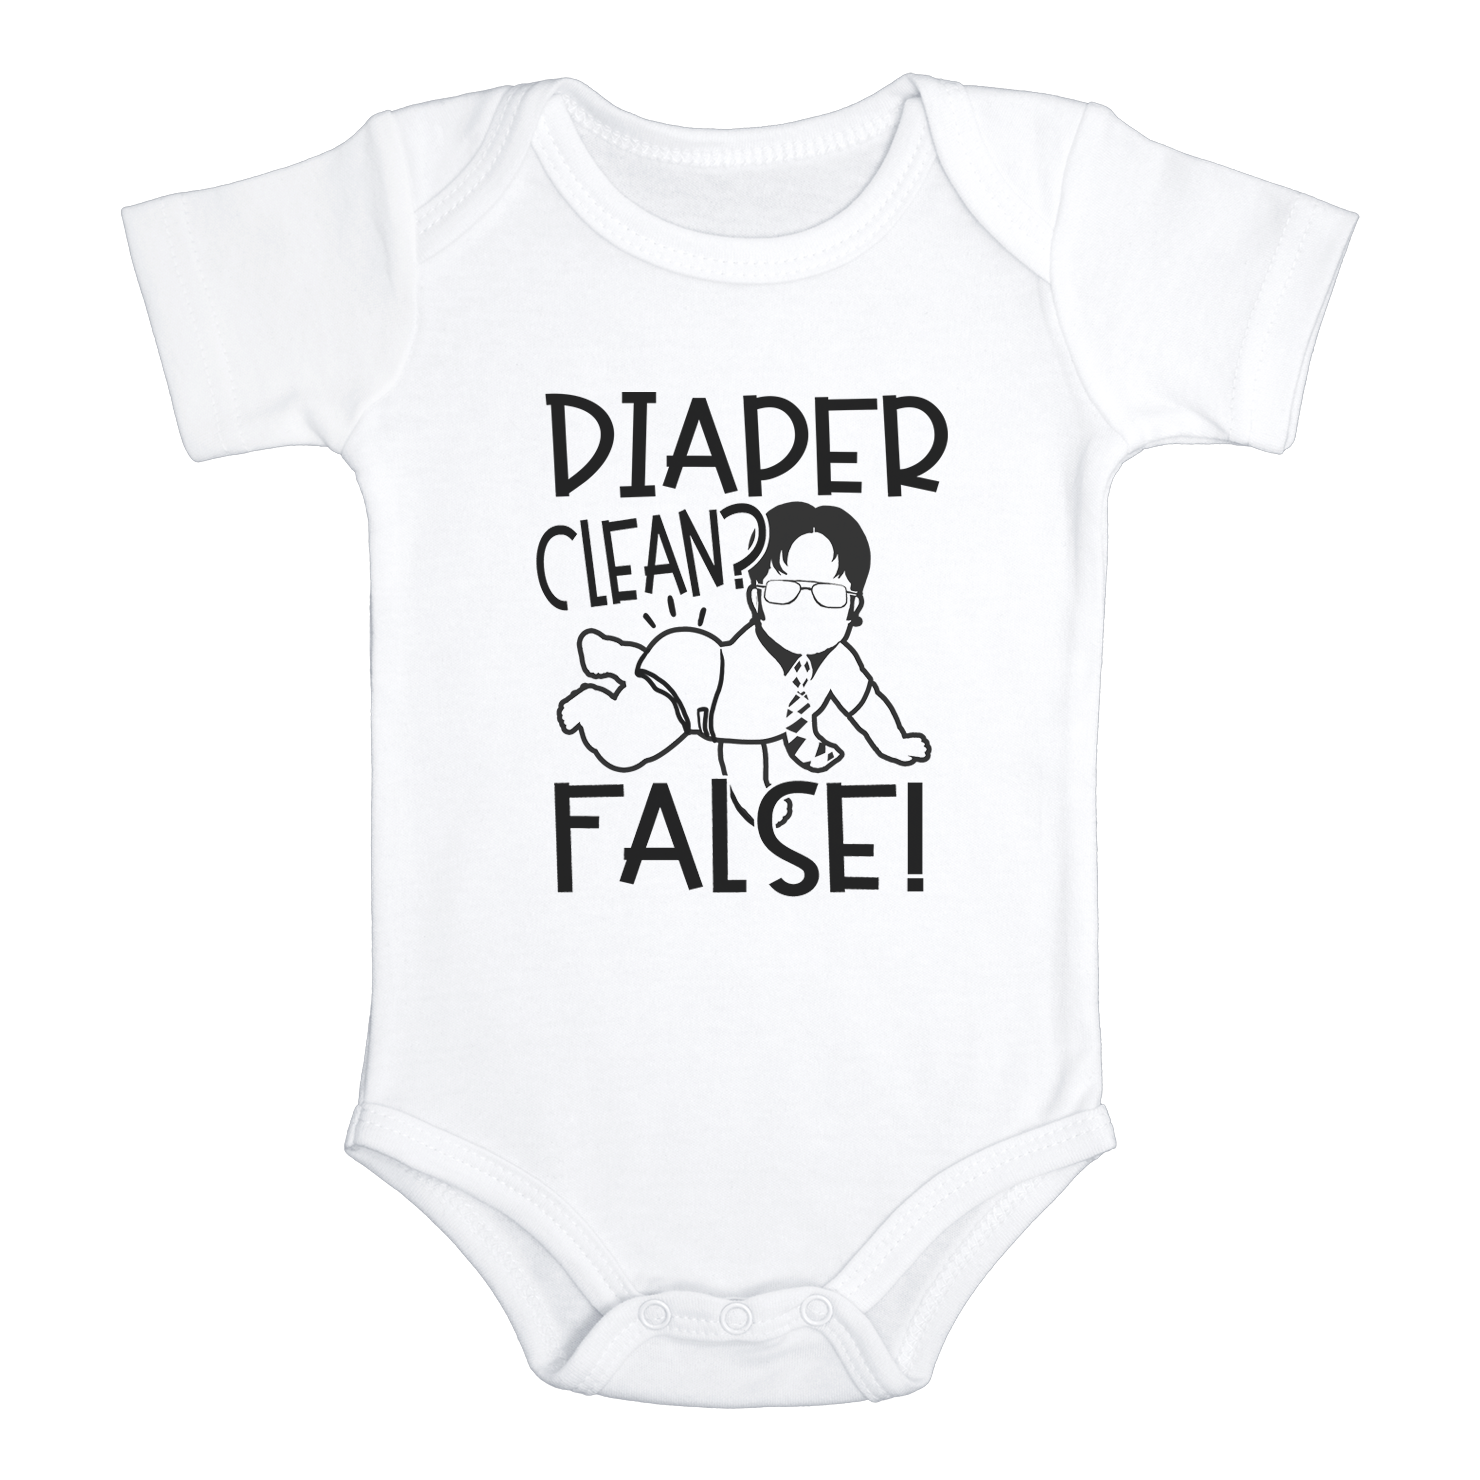 DIAPER CLEAN? FALSE! Funny baby onesies bodysuit (white: short or long sleeve) - HappyAddition